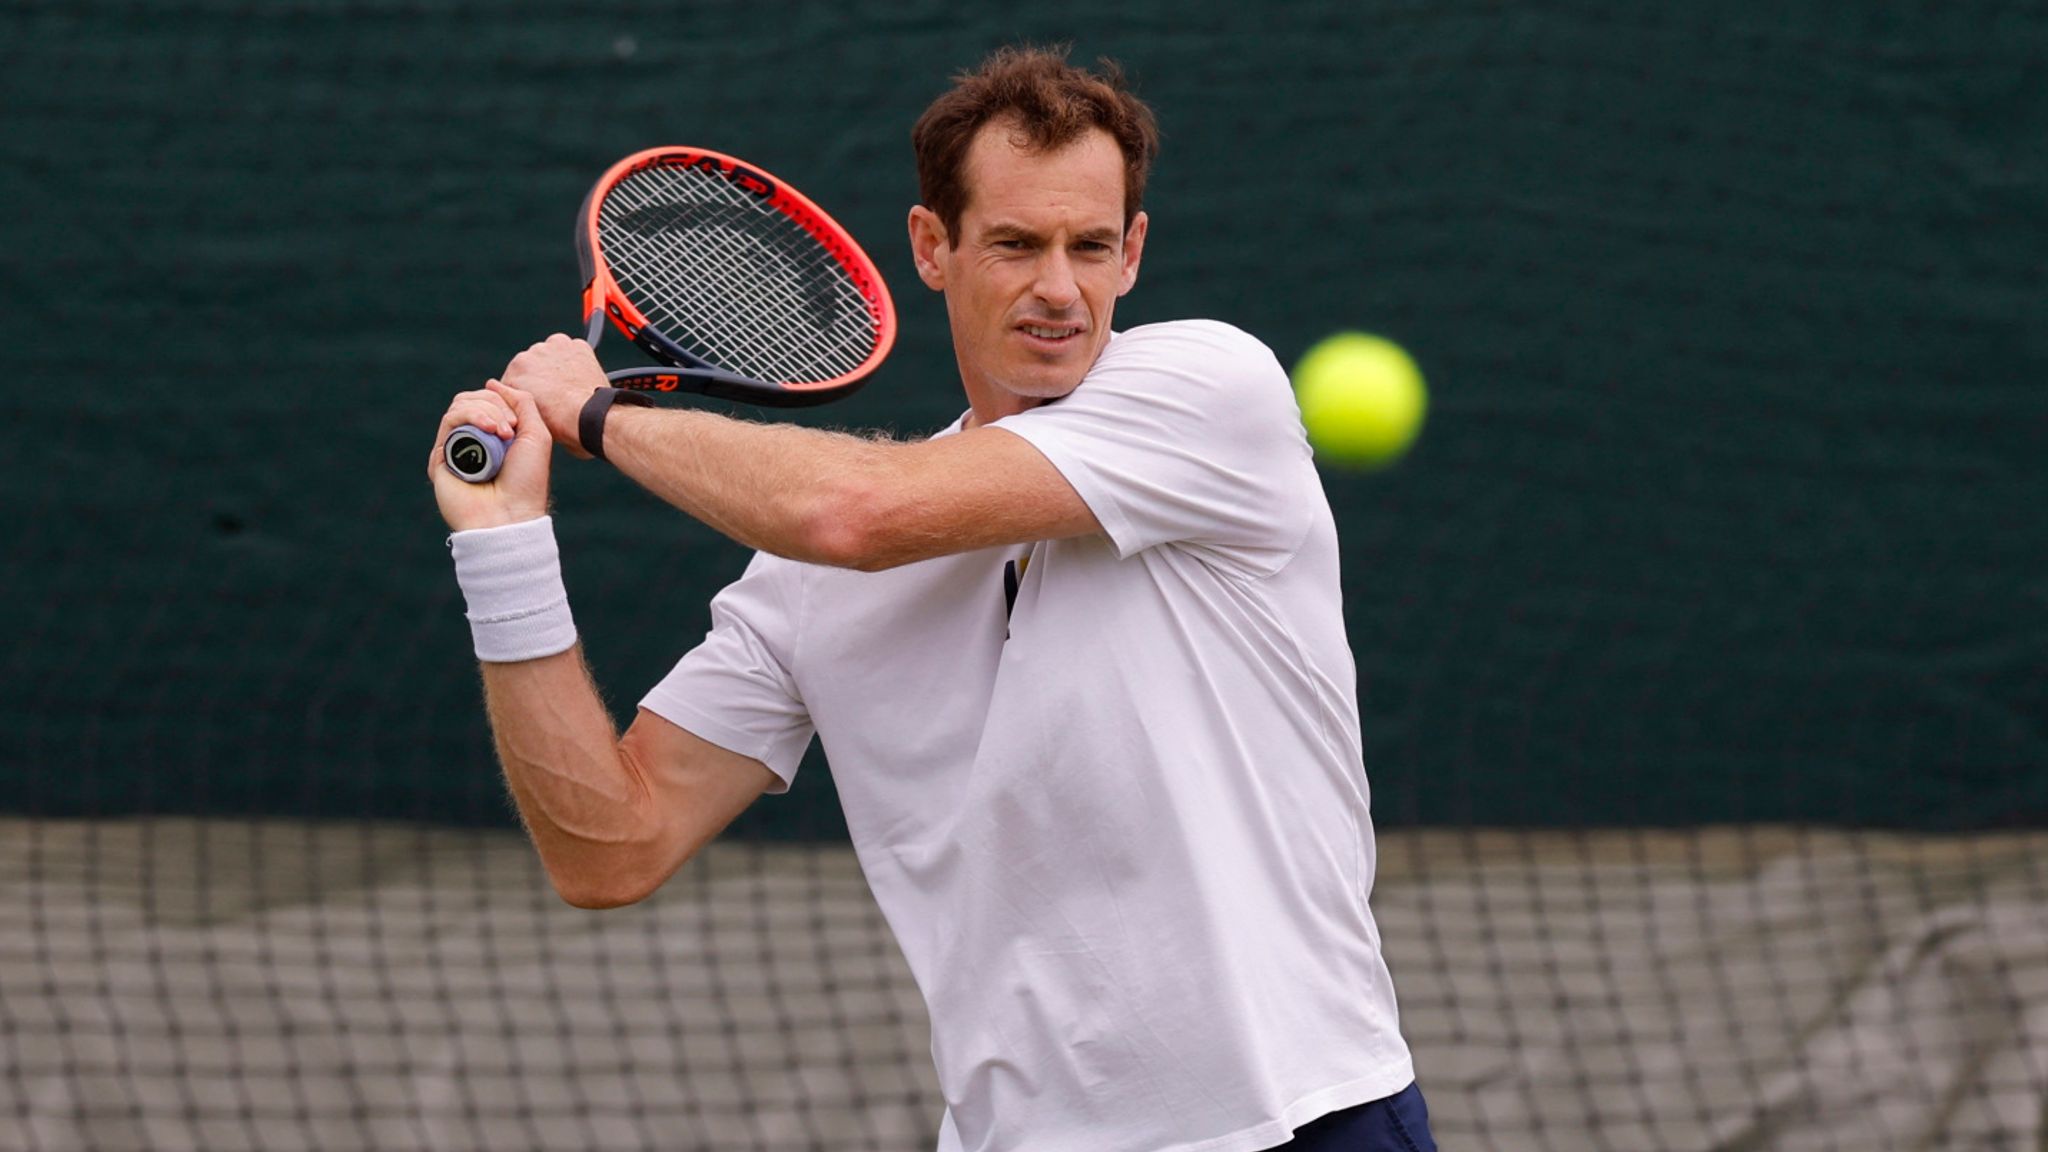 Andy Murray warns Just Stop Oil against targeting Wimbledon as group